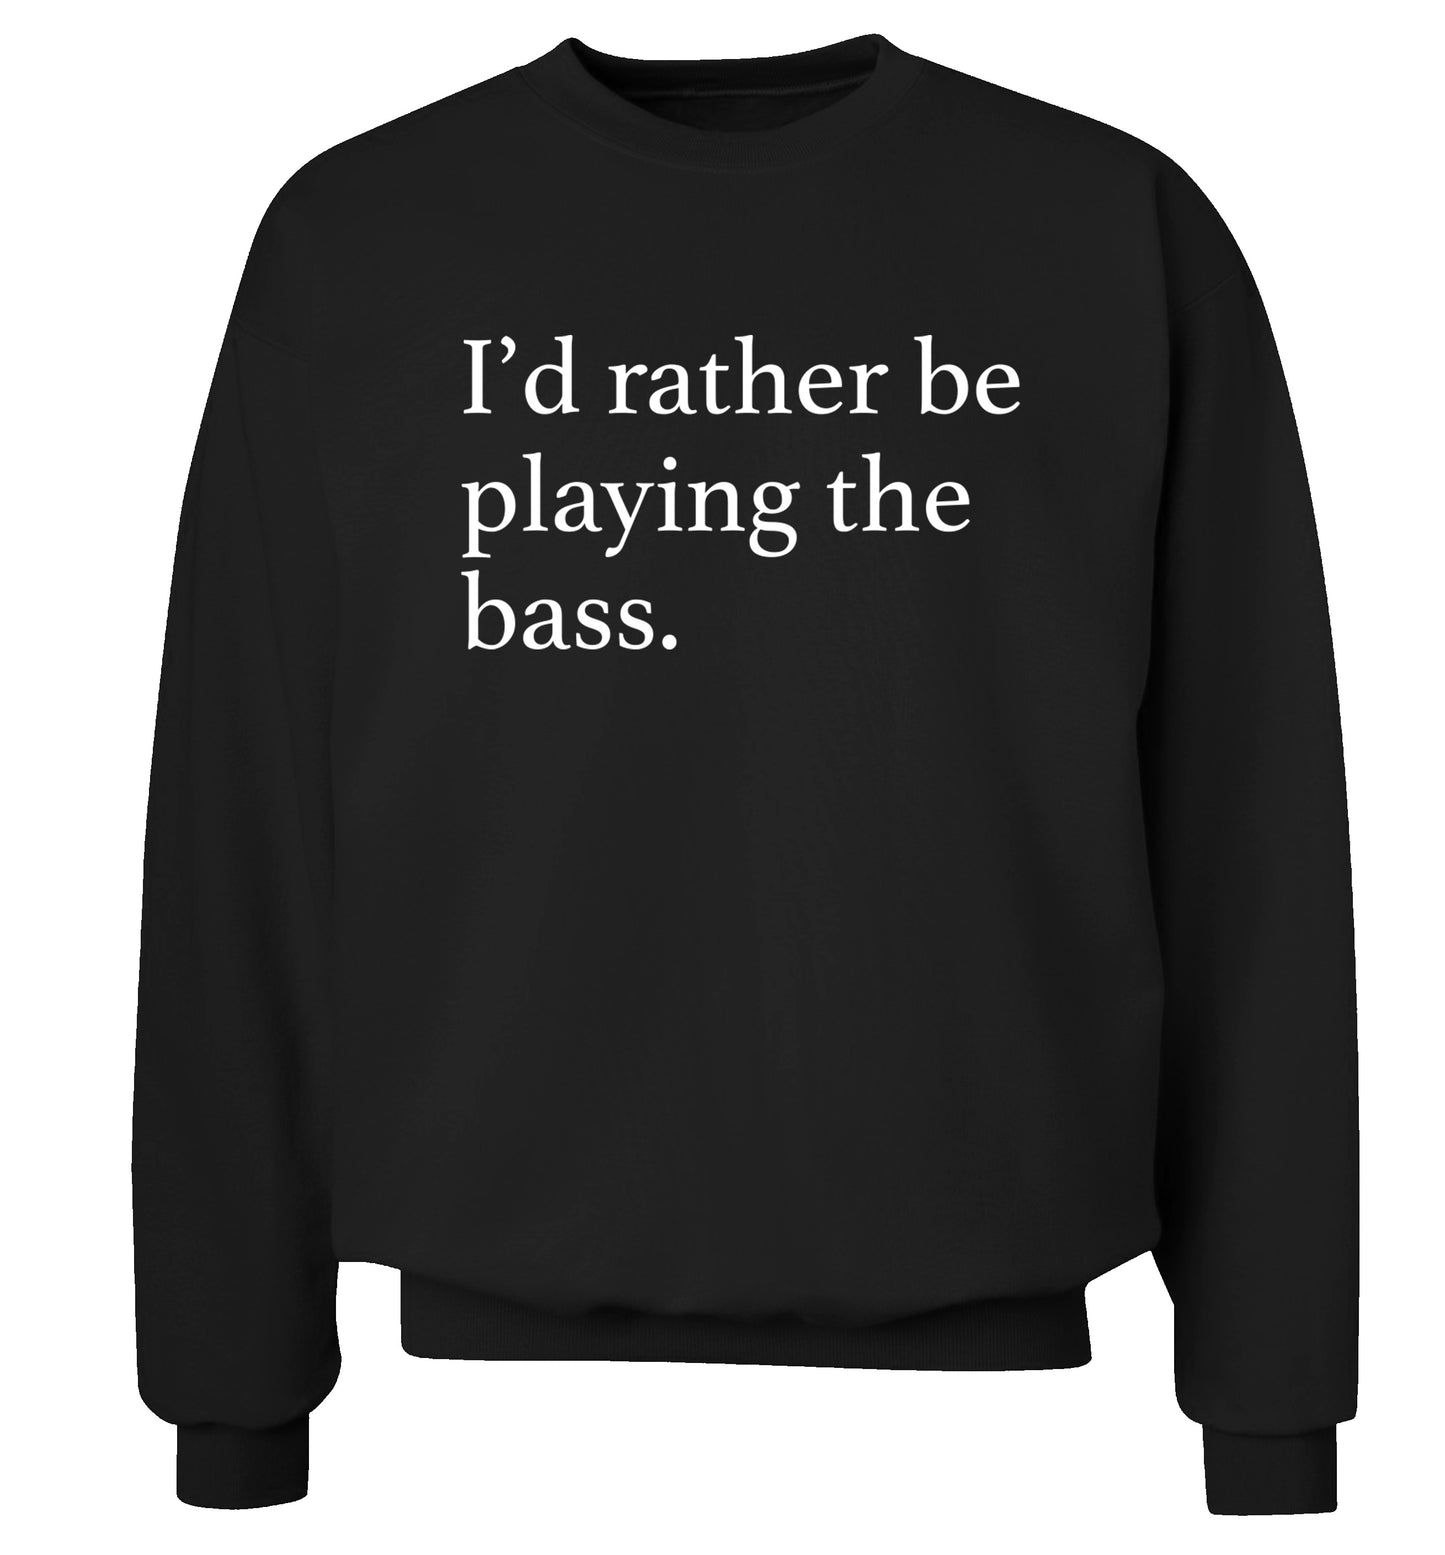 I'd rather by playing the bass Adult's unisex black Sweater 2XL